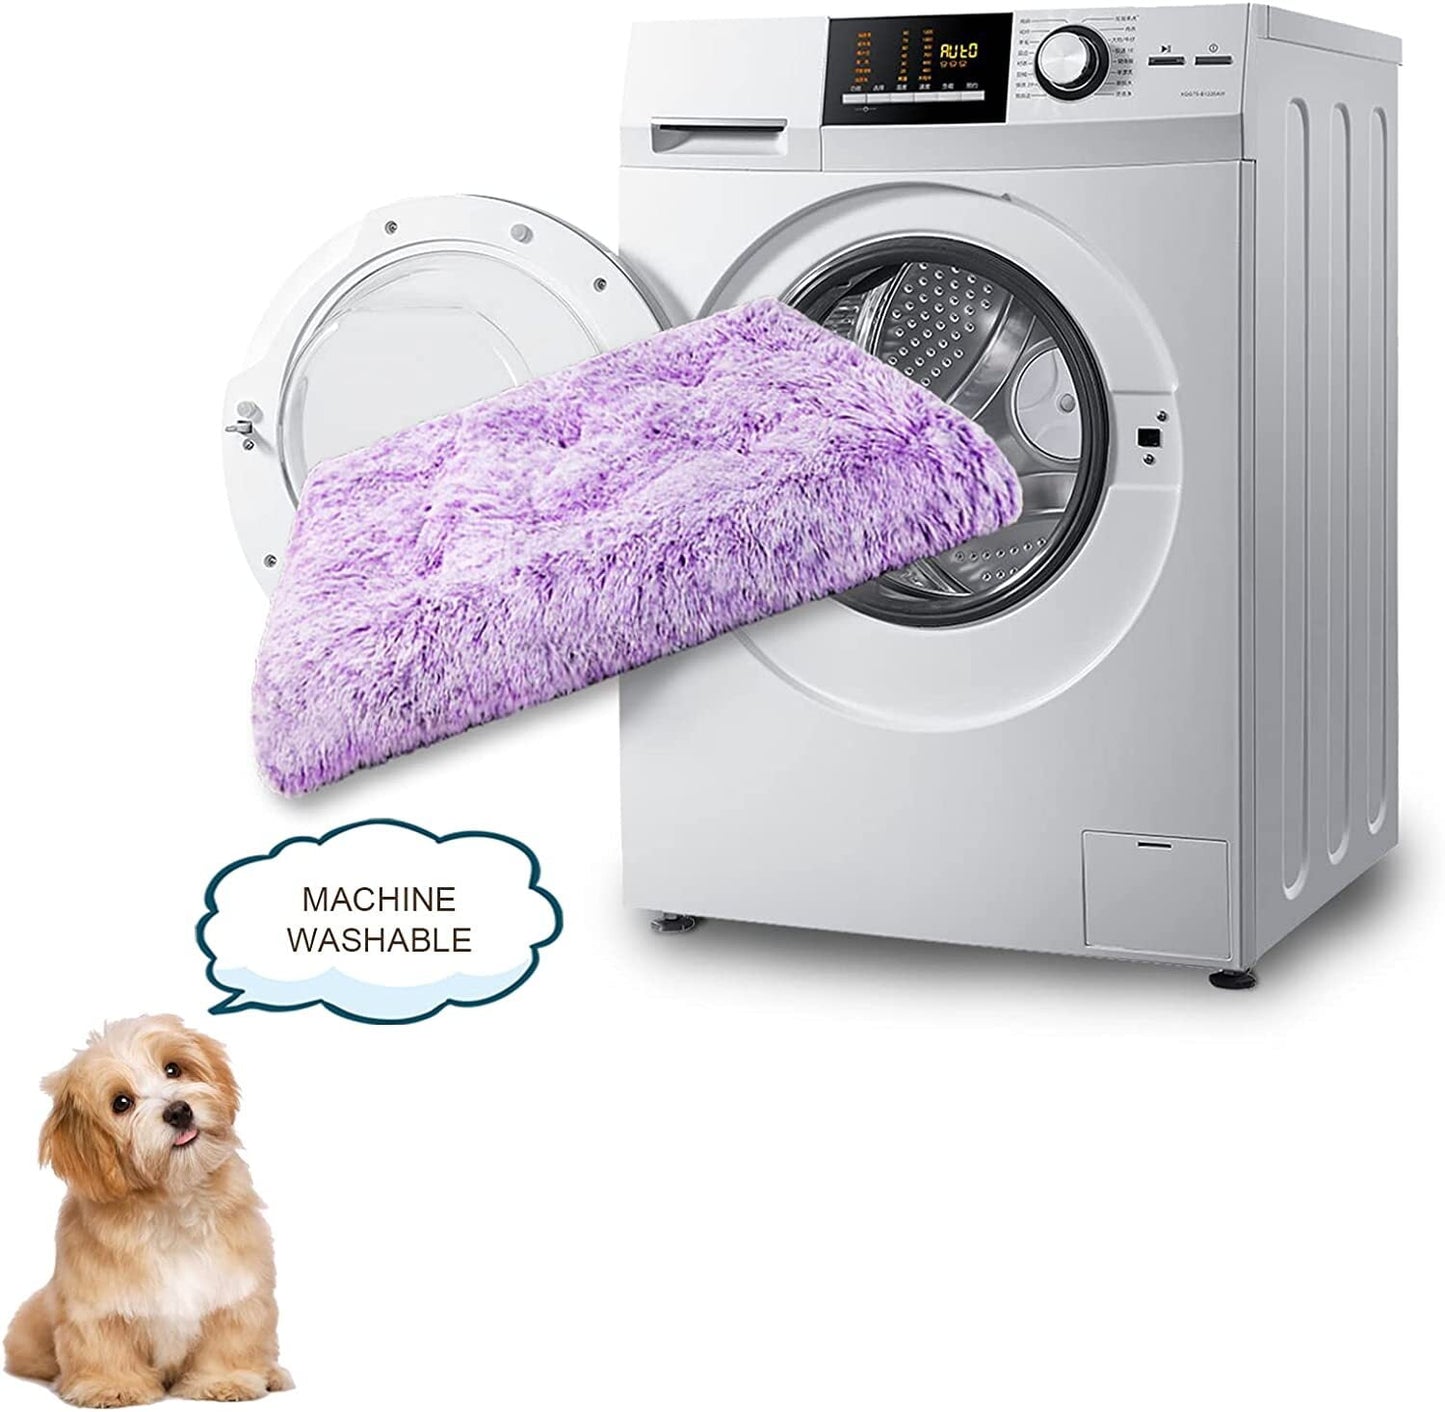 Exclusivo Mecla Soft Plush Dog Bed Crate Mat for Small Dogs (26*20*4 in), Faux Fur Fluffy Dog Pet Cat Kennel Pad with Anti-Slip Bottom, Machine Washable Gradient Purple